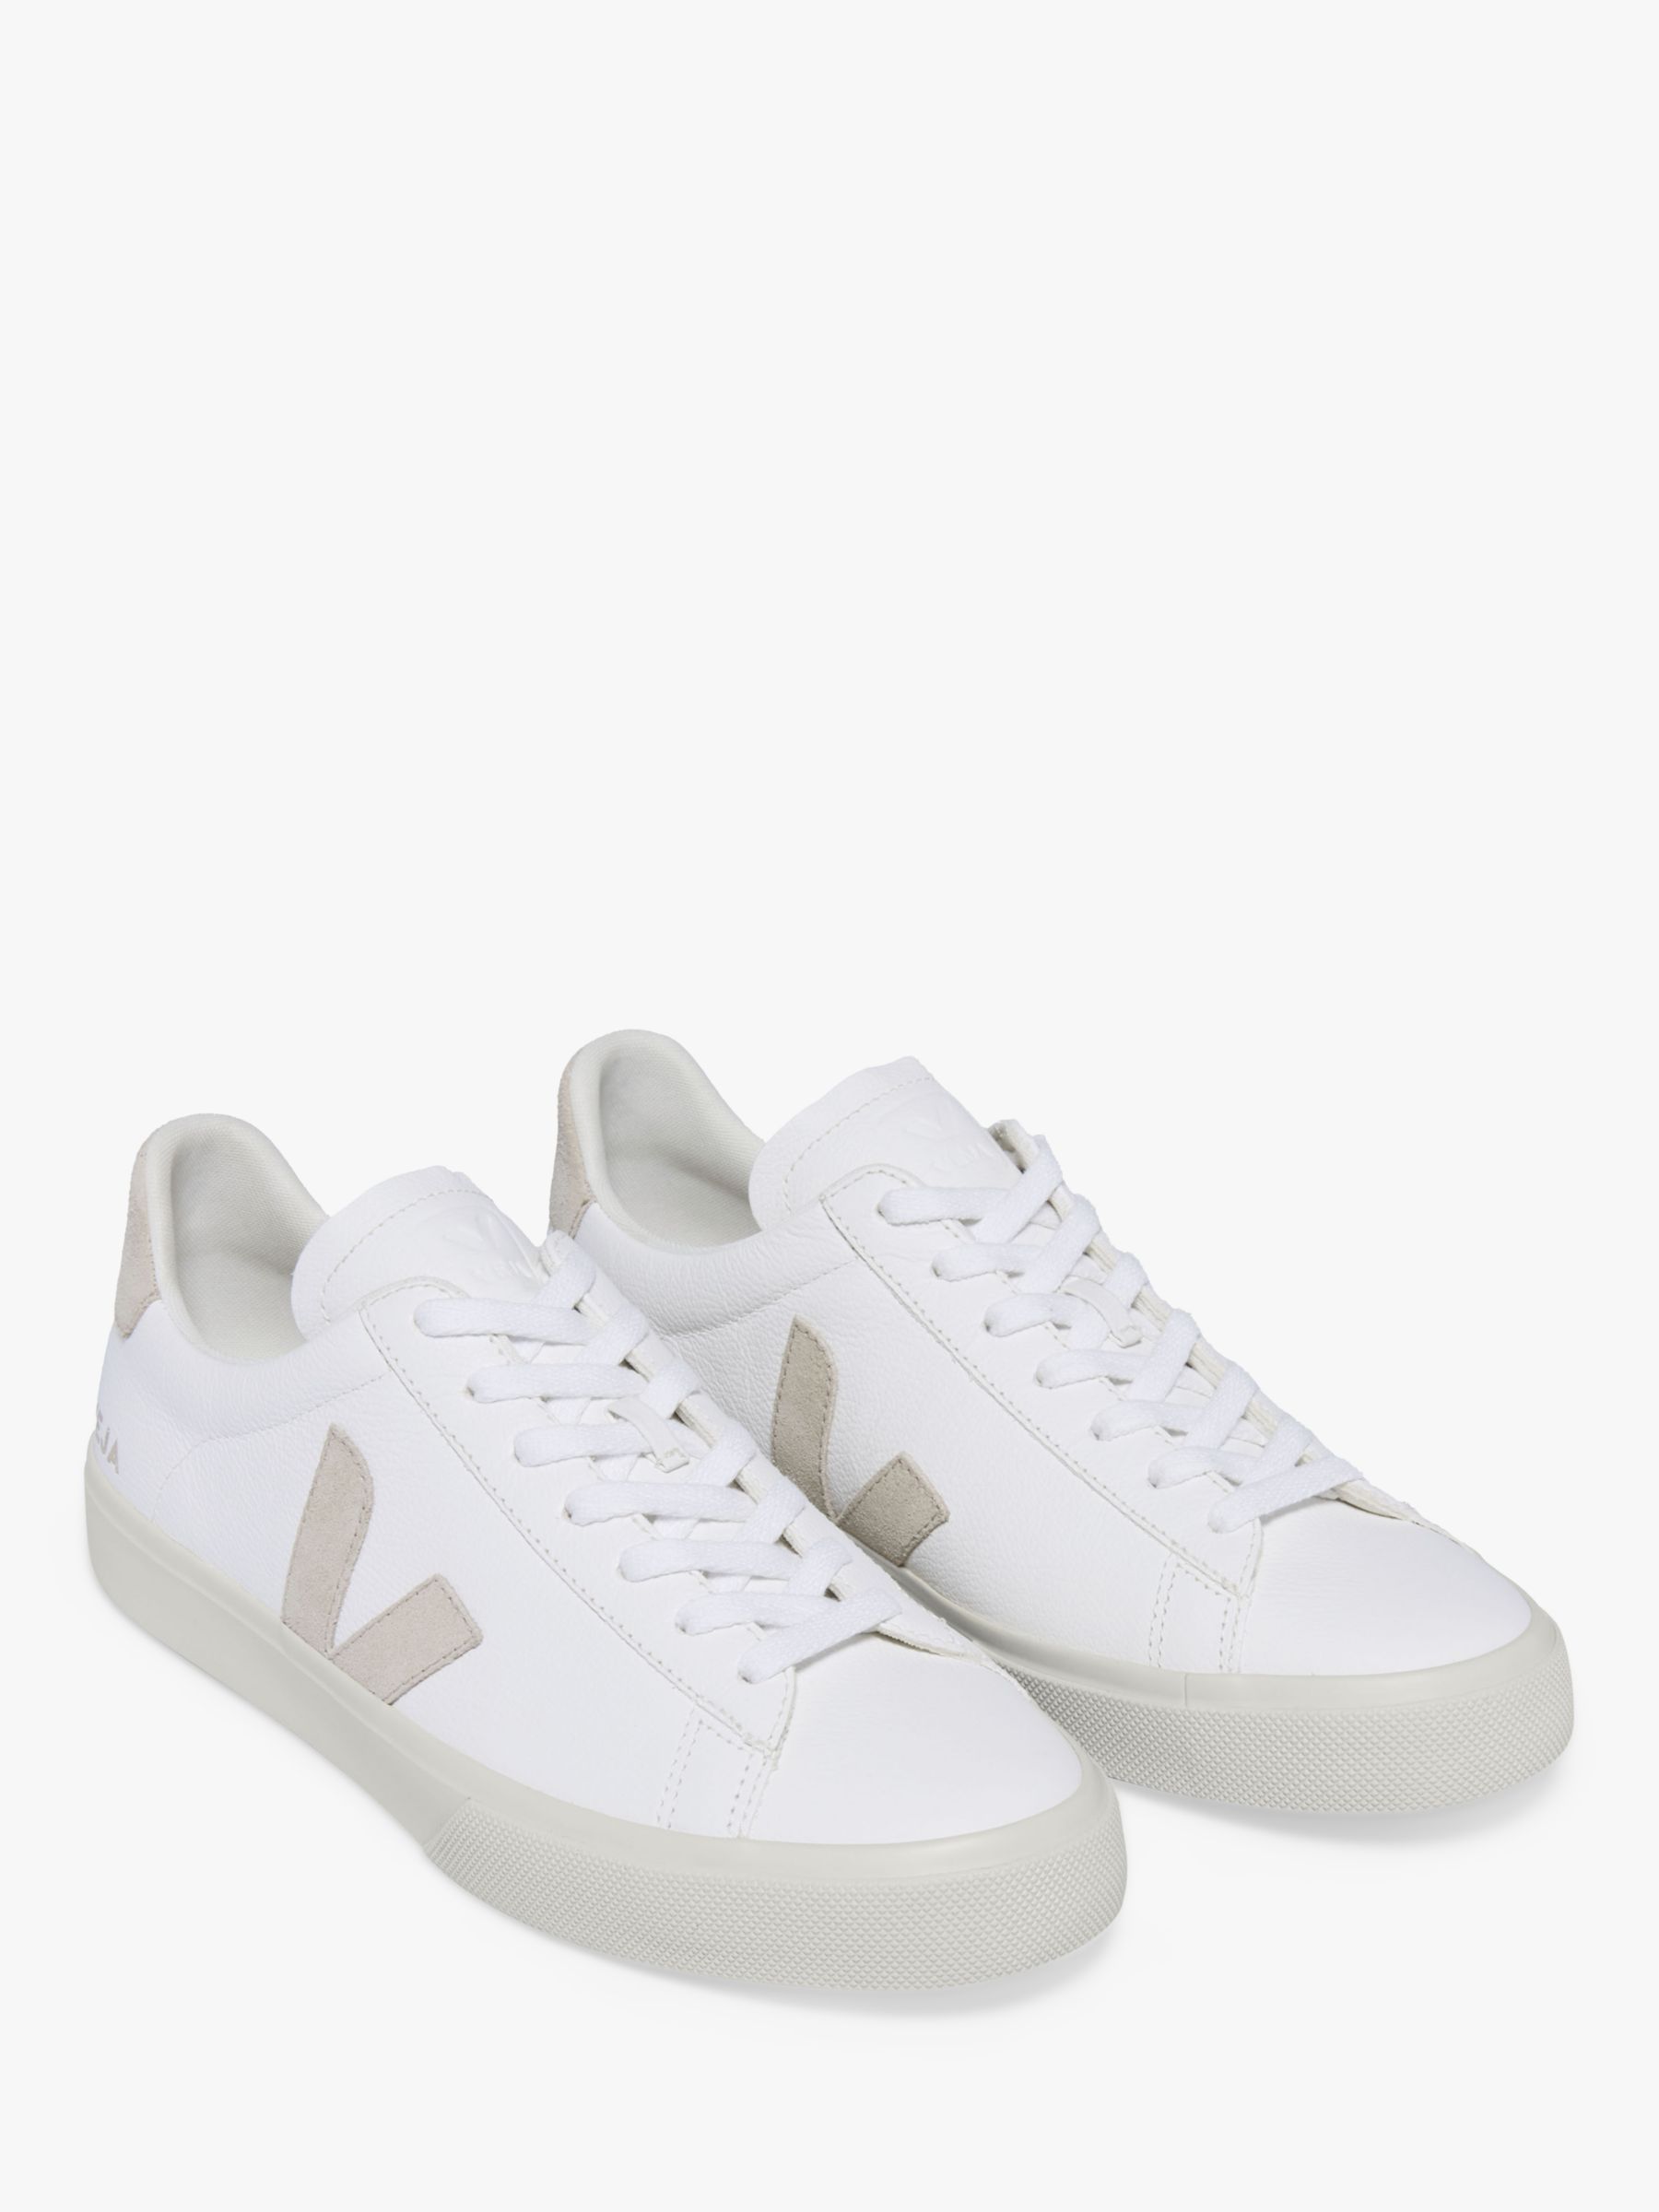 VEJA Campo Leather Suede Detail Trainers, Extra White/Natural, 4